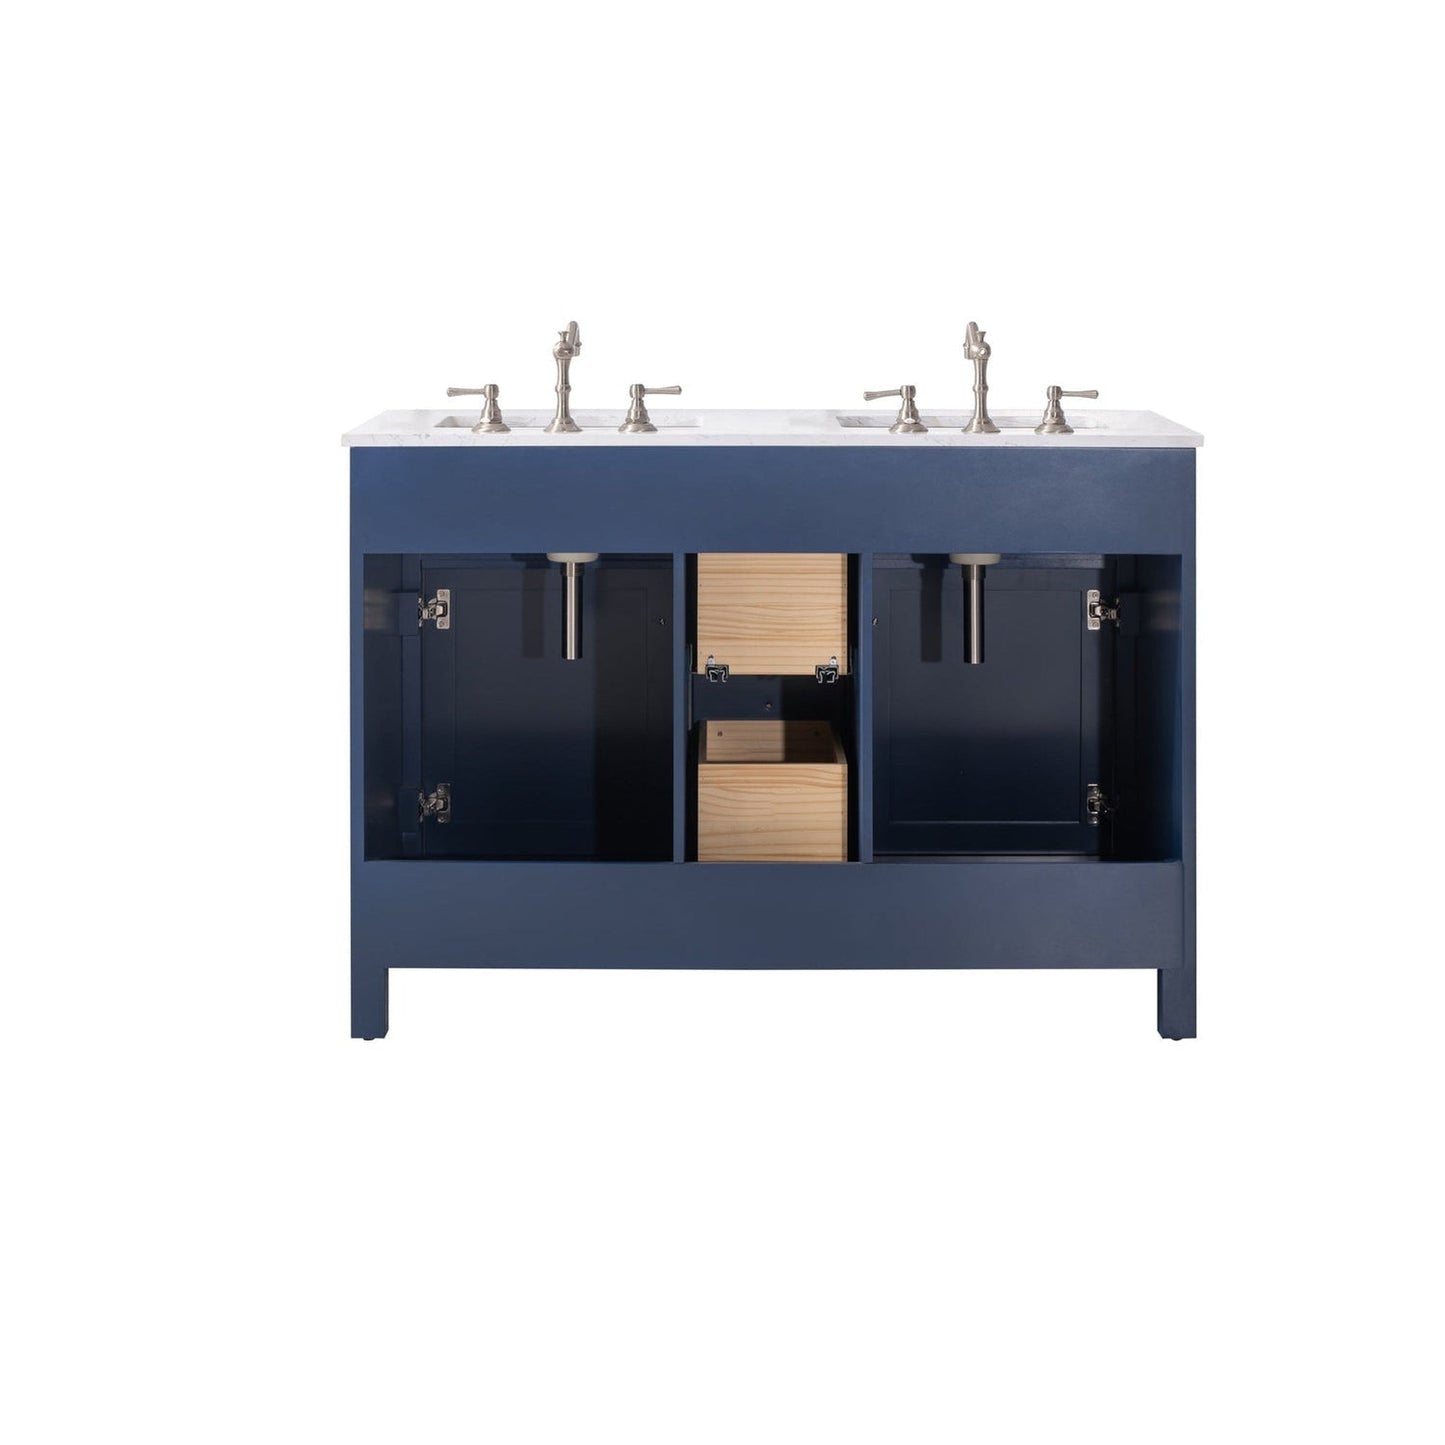 Eviva Totti Artemis 48" x 34" Blue Freestanding Bathroom Vanity With Carrara Style Man-made Stone Countertop and Double Undermount Sink